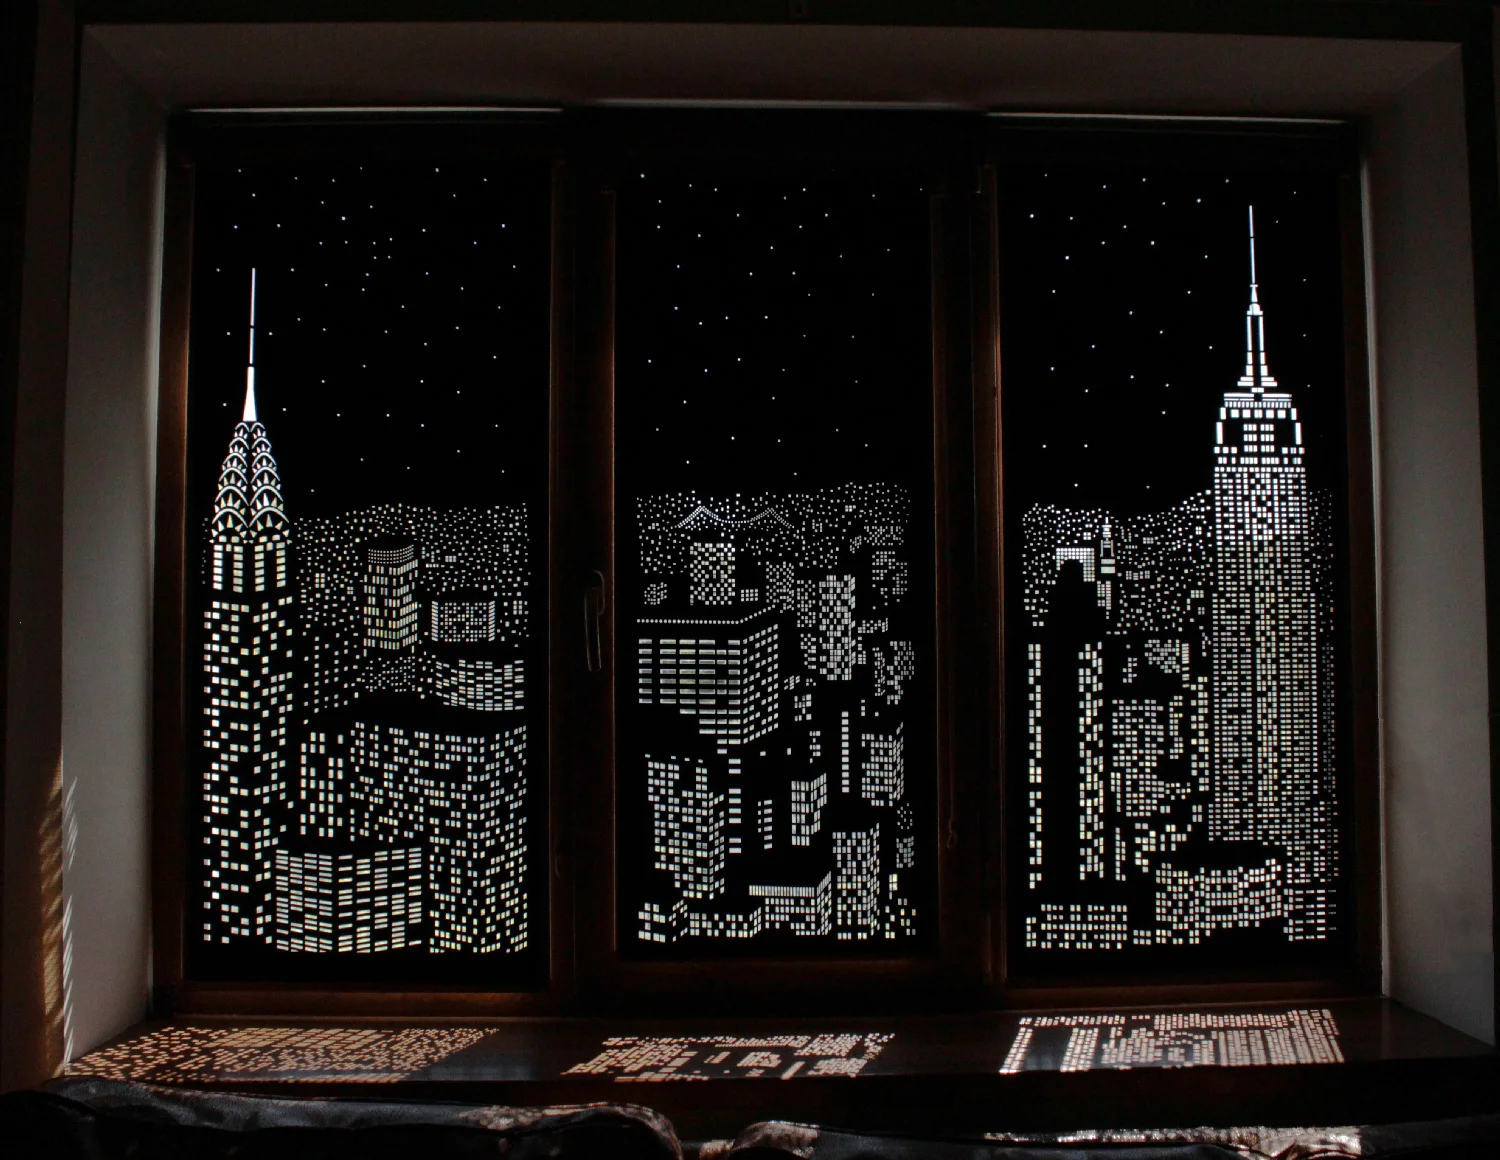 Roller blinds perforollo night City, width 50-160 cm, black, holeroll Roller blinds roller blinds blinds curtains for windows beautiful blackout white beige